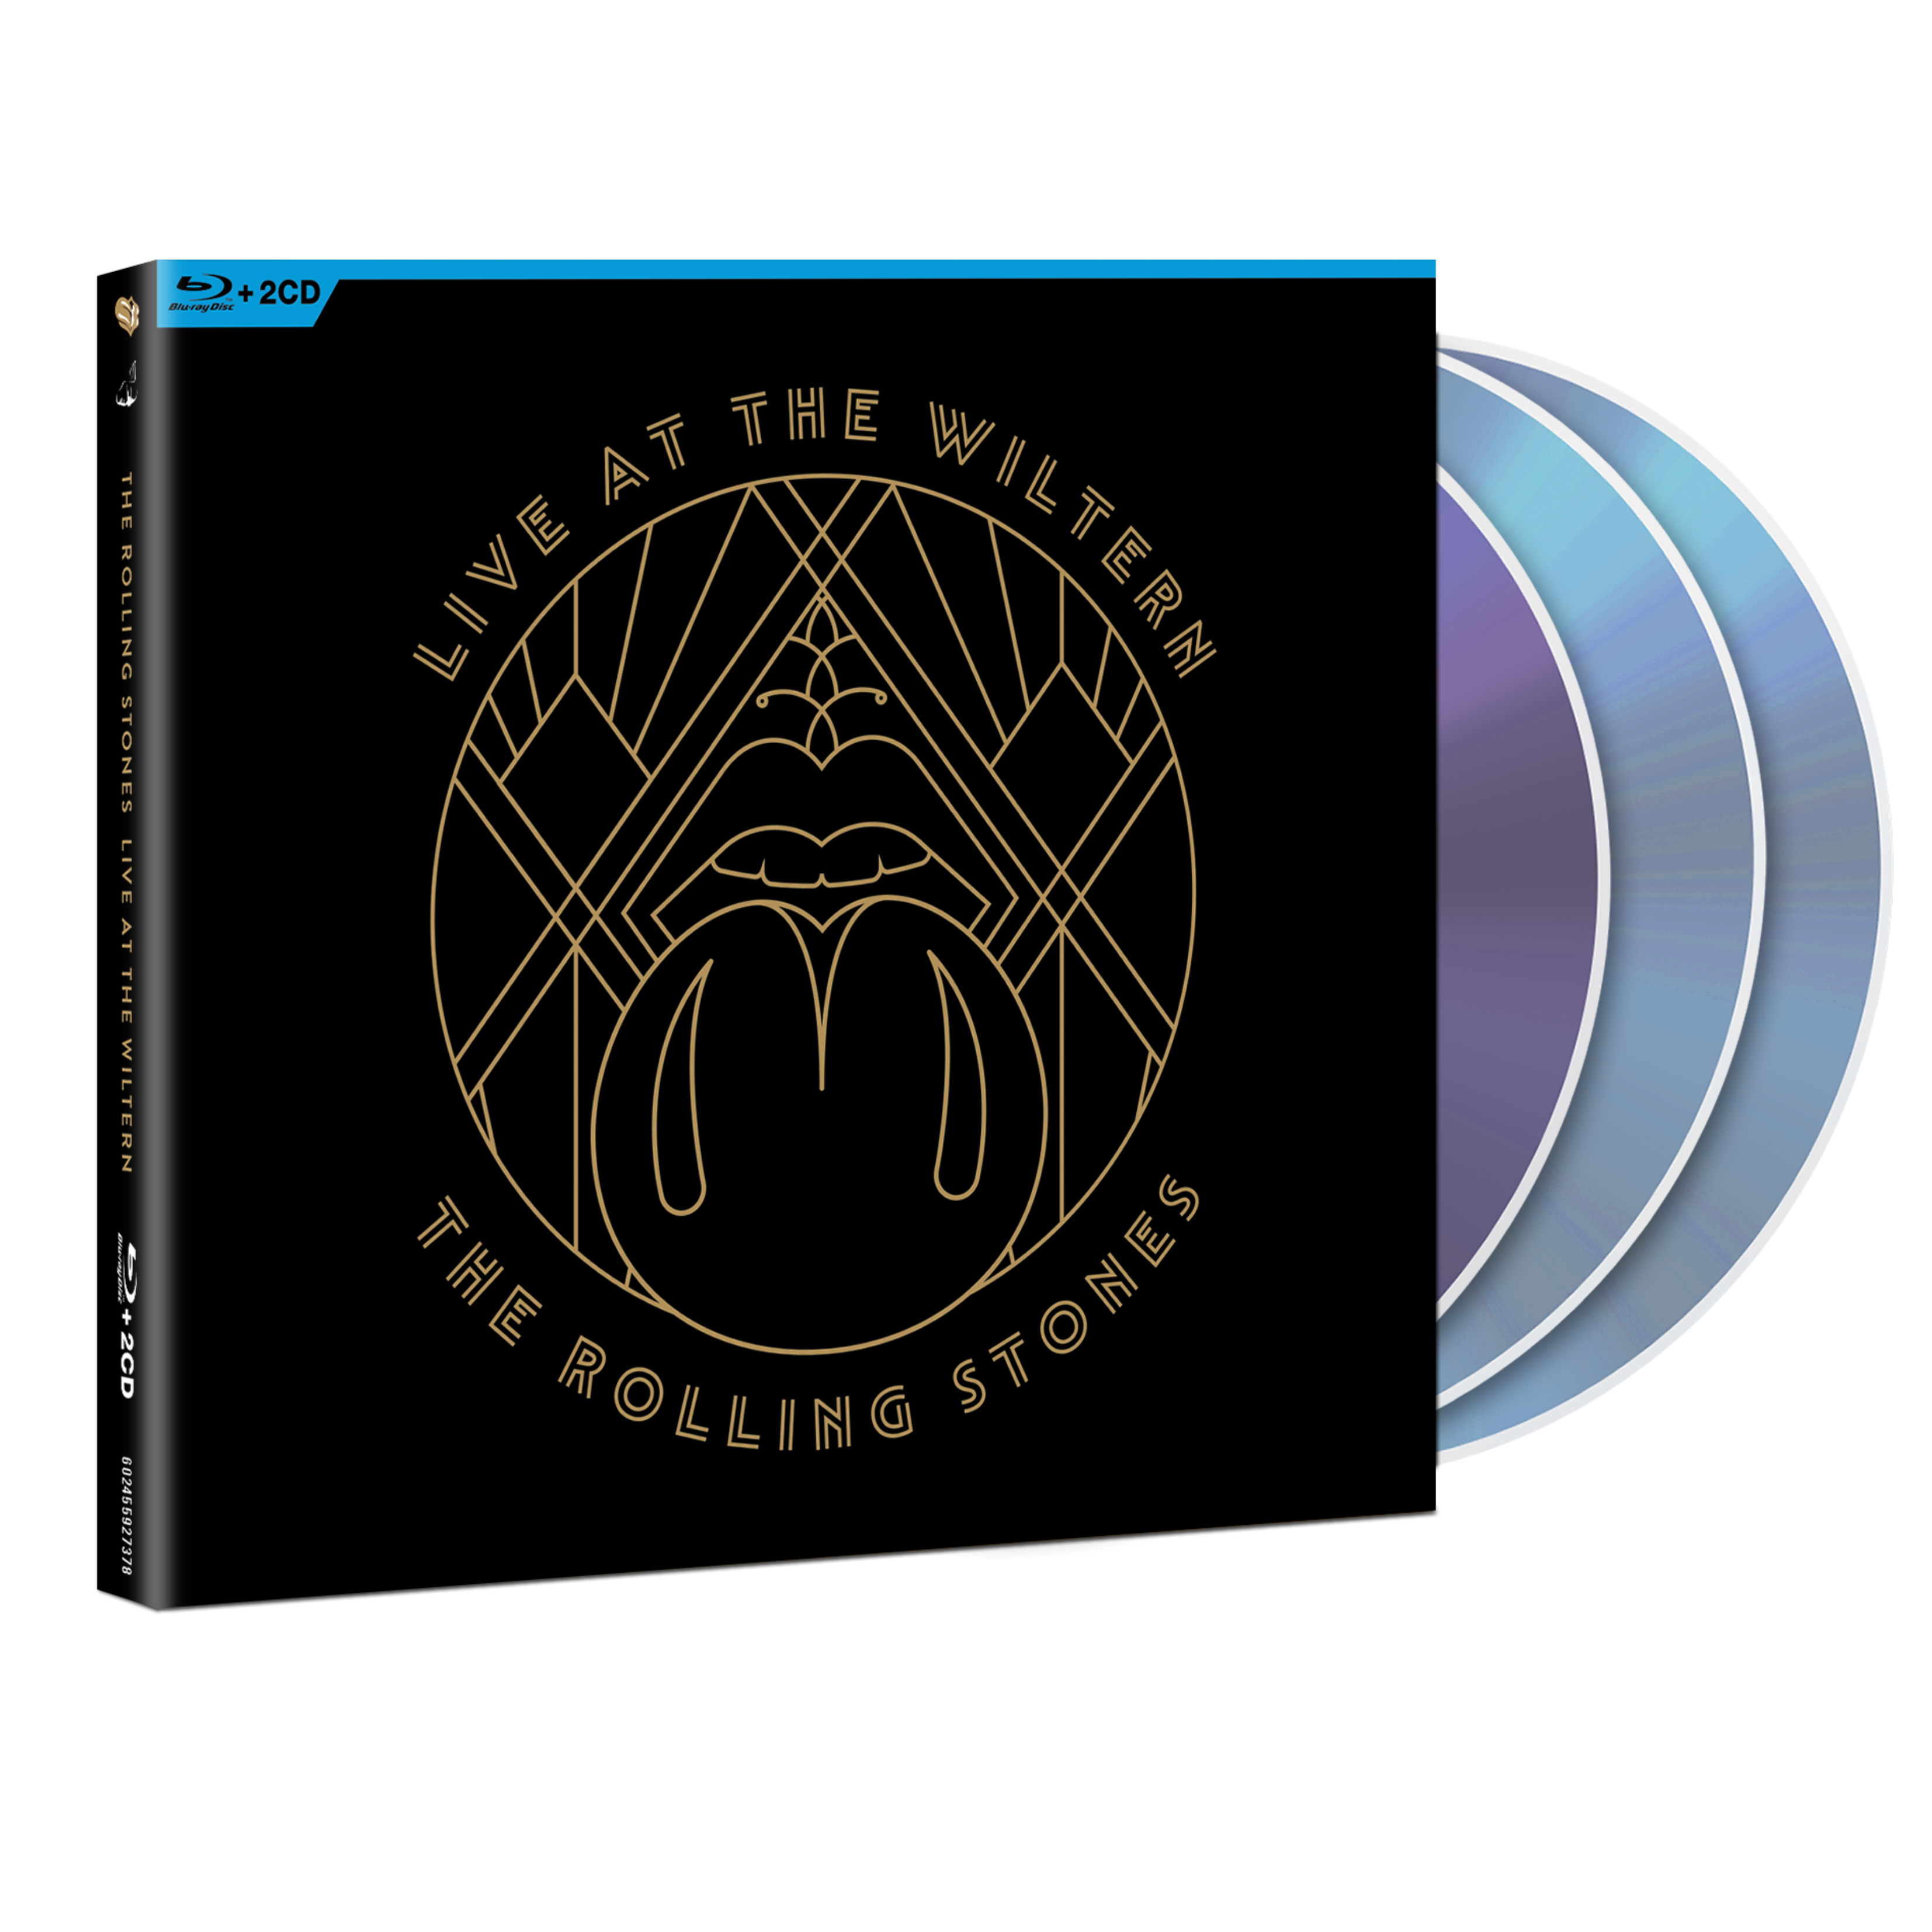 The Rolling Stones - Live At The Wiltern: Blu-Ray & 2CD